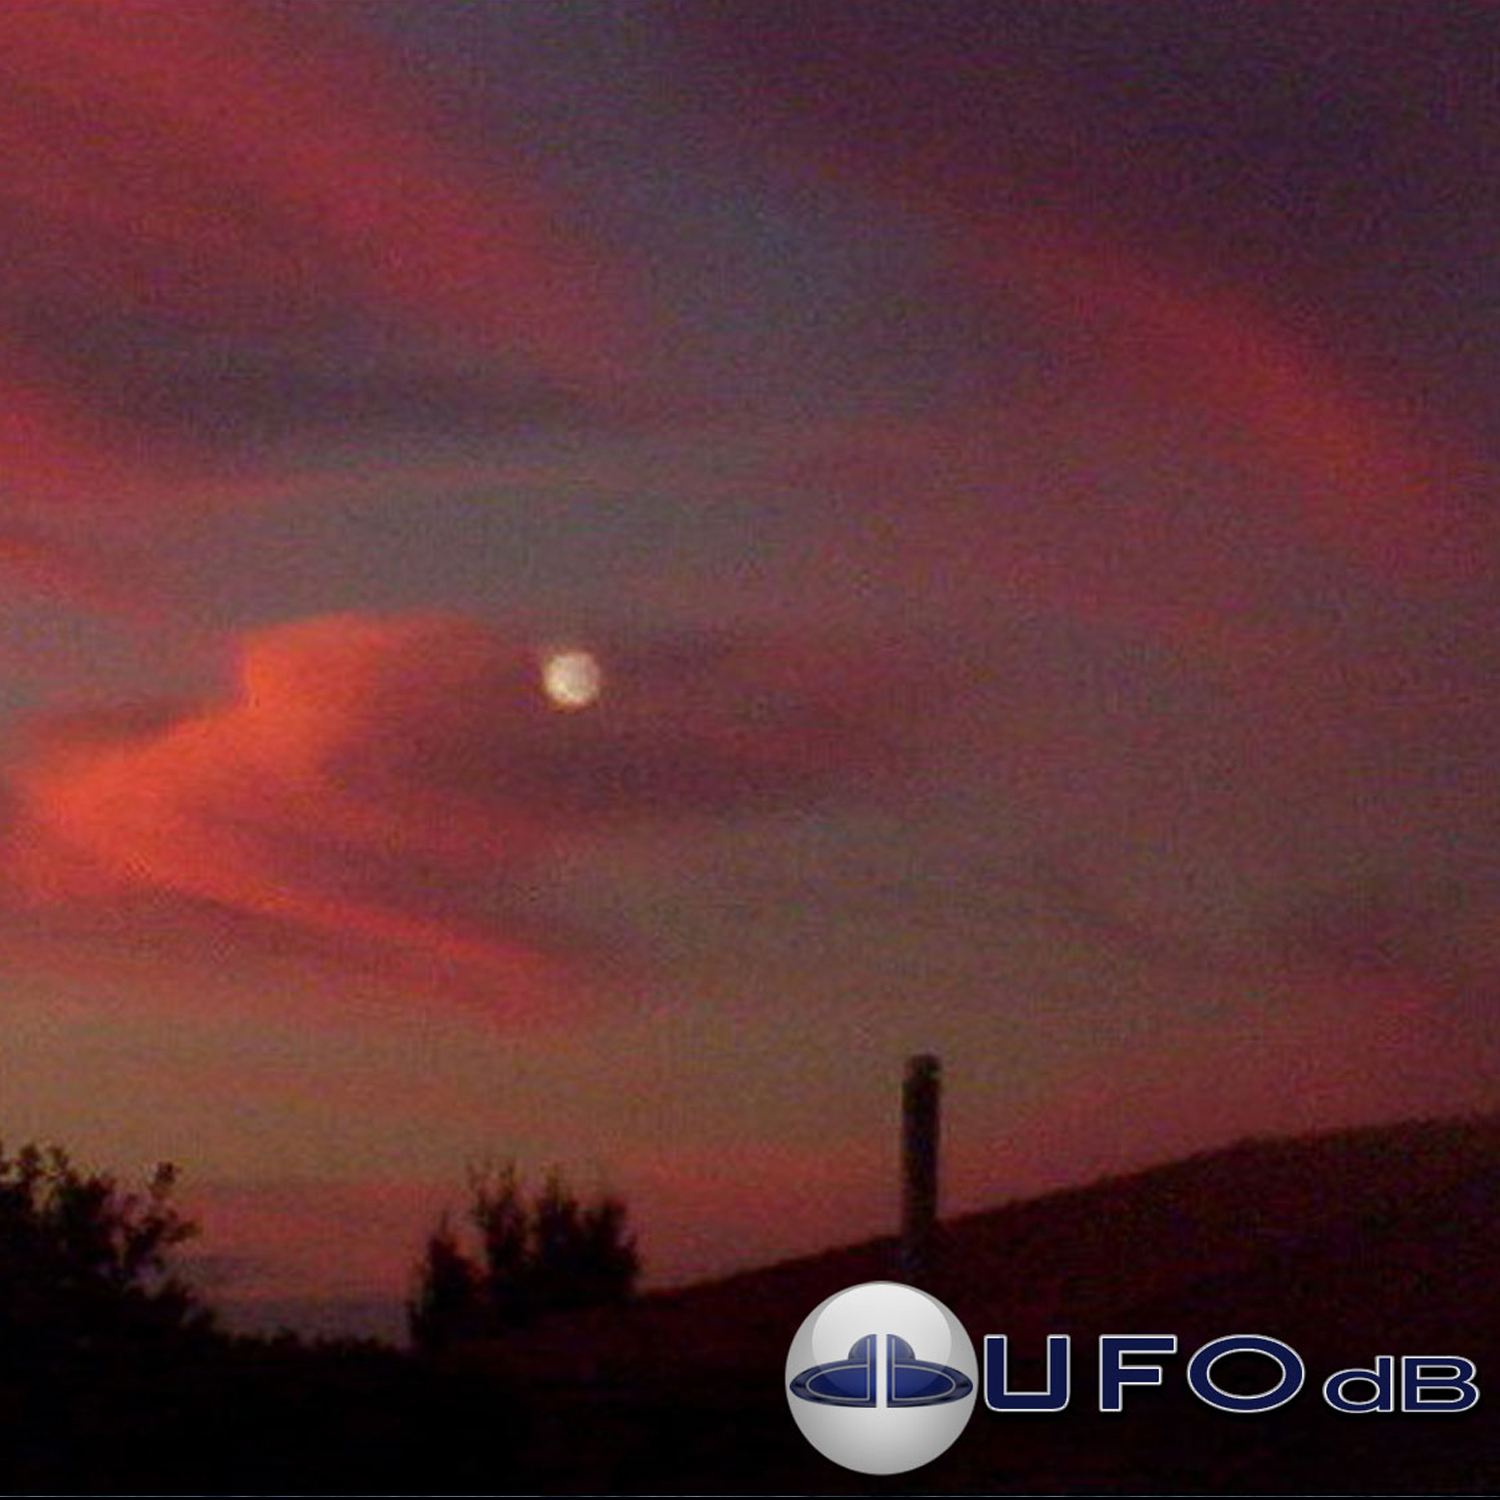 UFO picture shot on dusk at Waroona in the Peel region of Australia UFO Picture #145-2